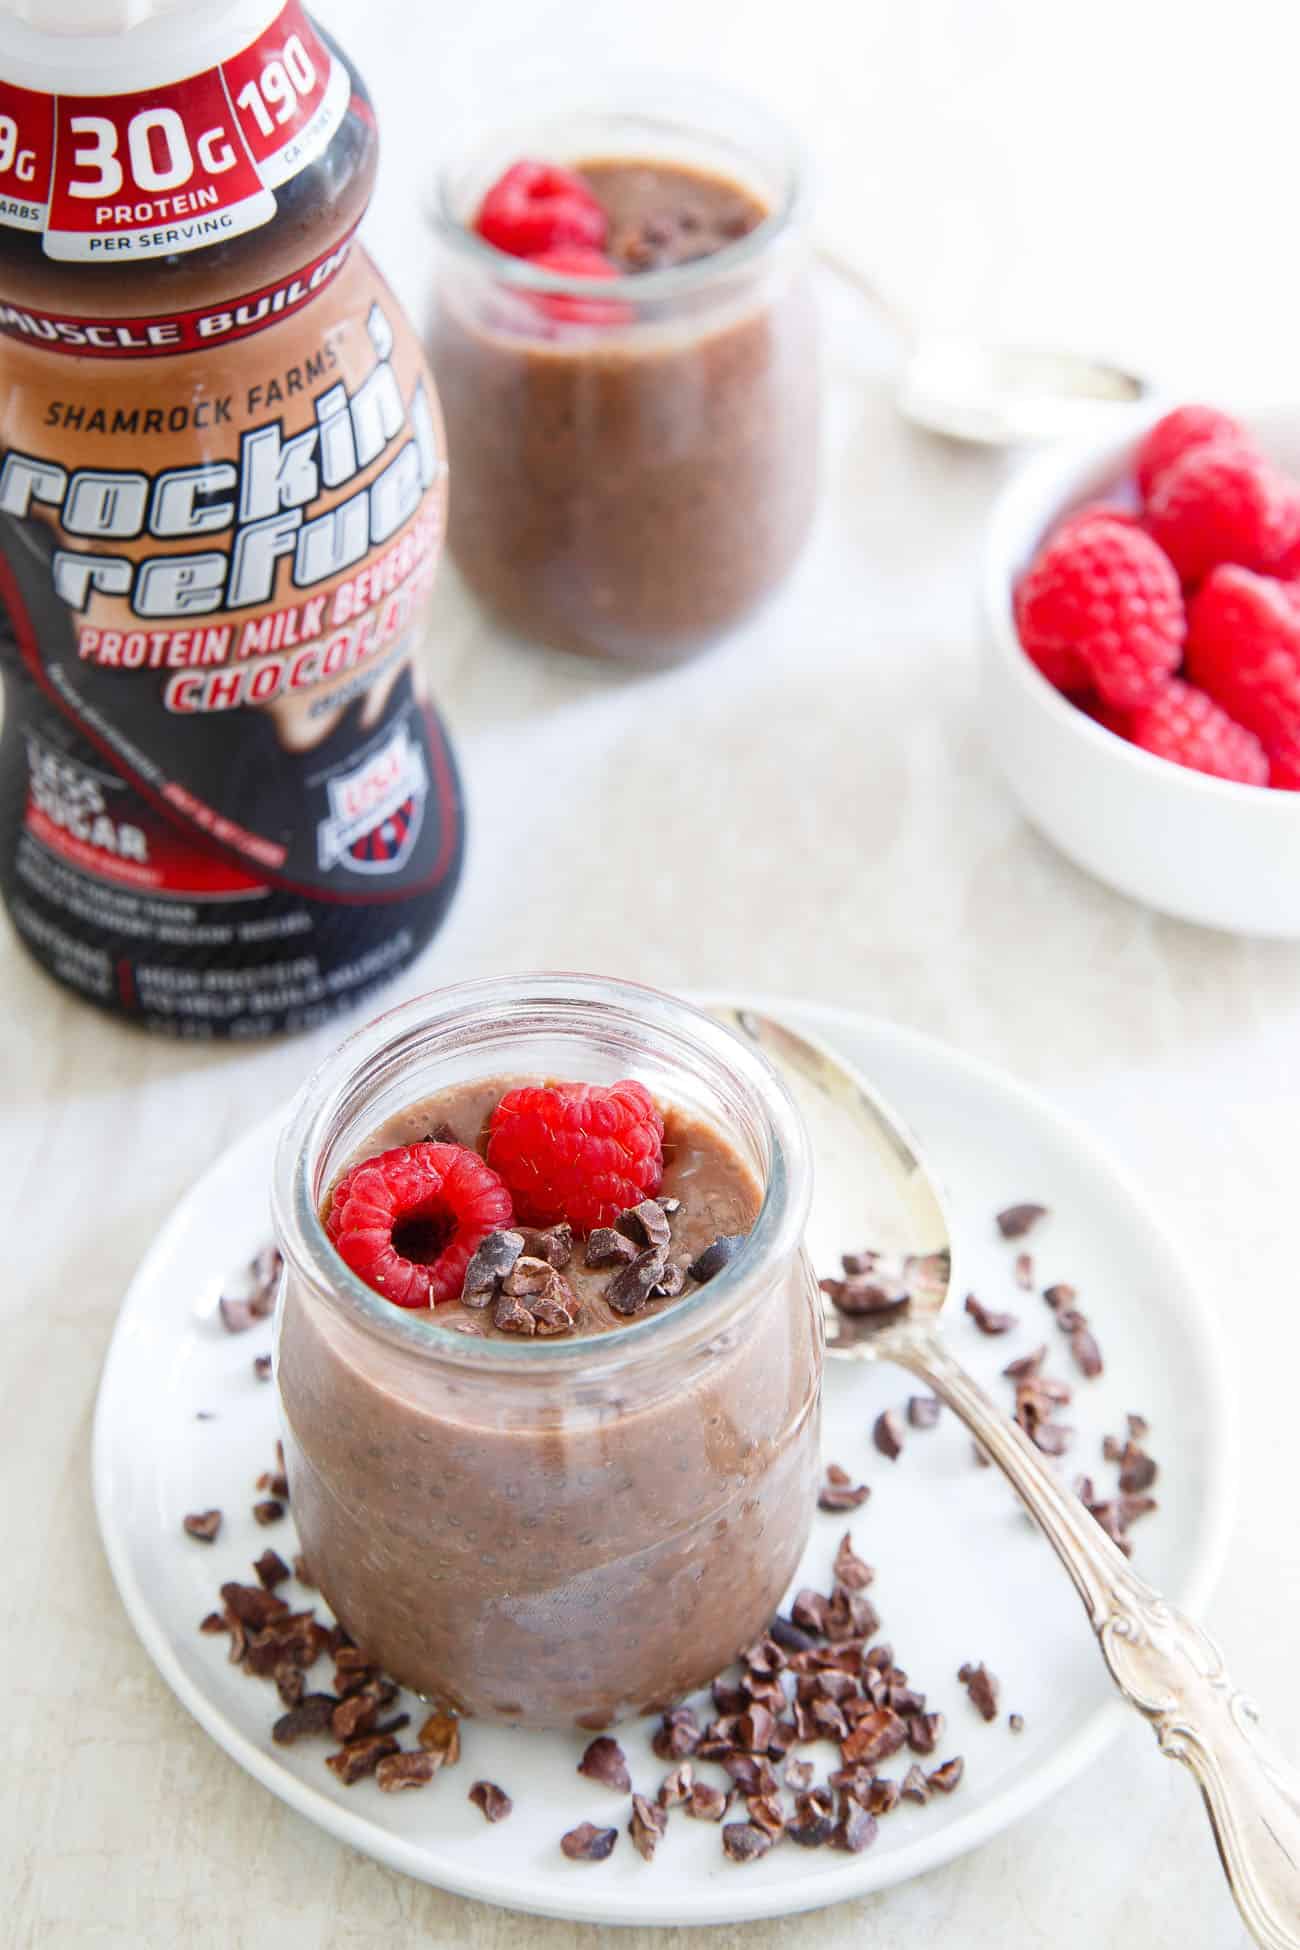 Chia pudding is the perfect healthy dessert option. Rockin' Refuel chocolate protein milk is the perfect high-protein base for making this chocolate almond version.